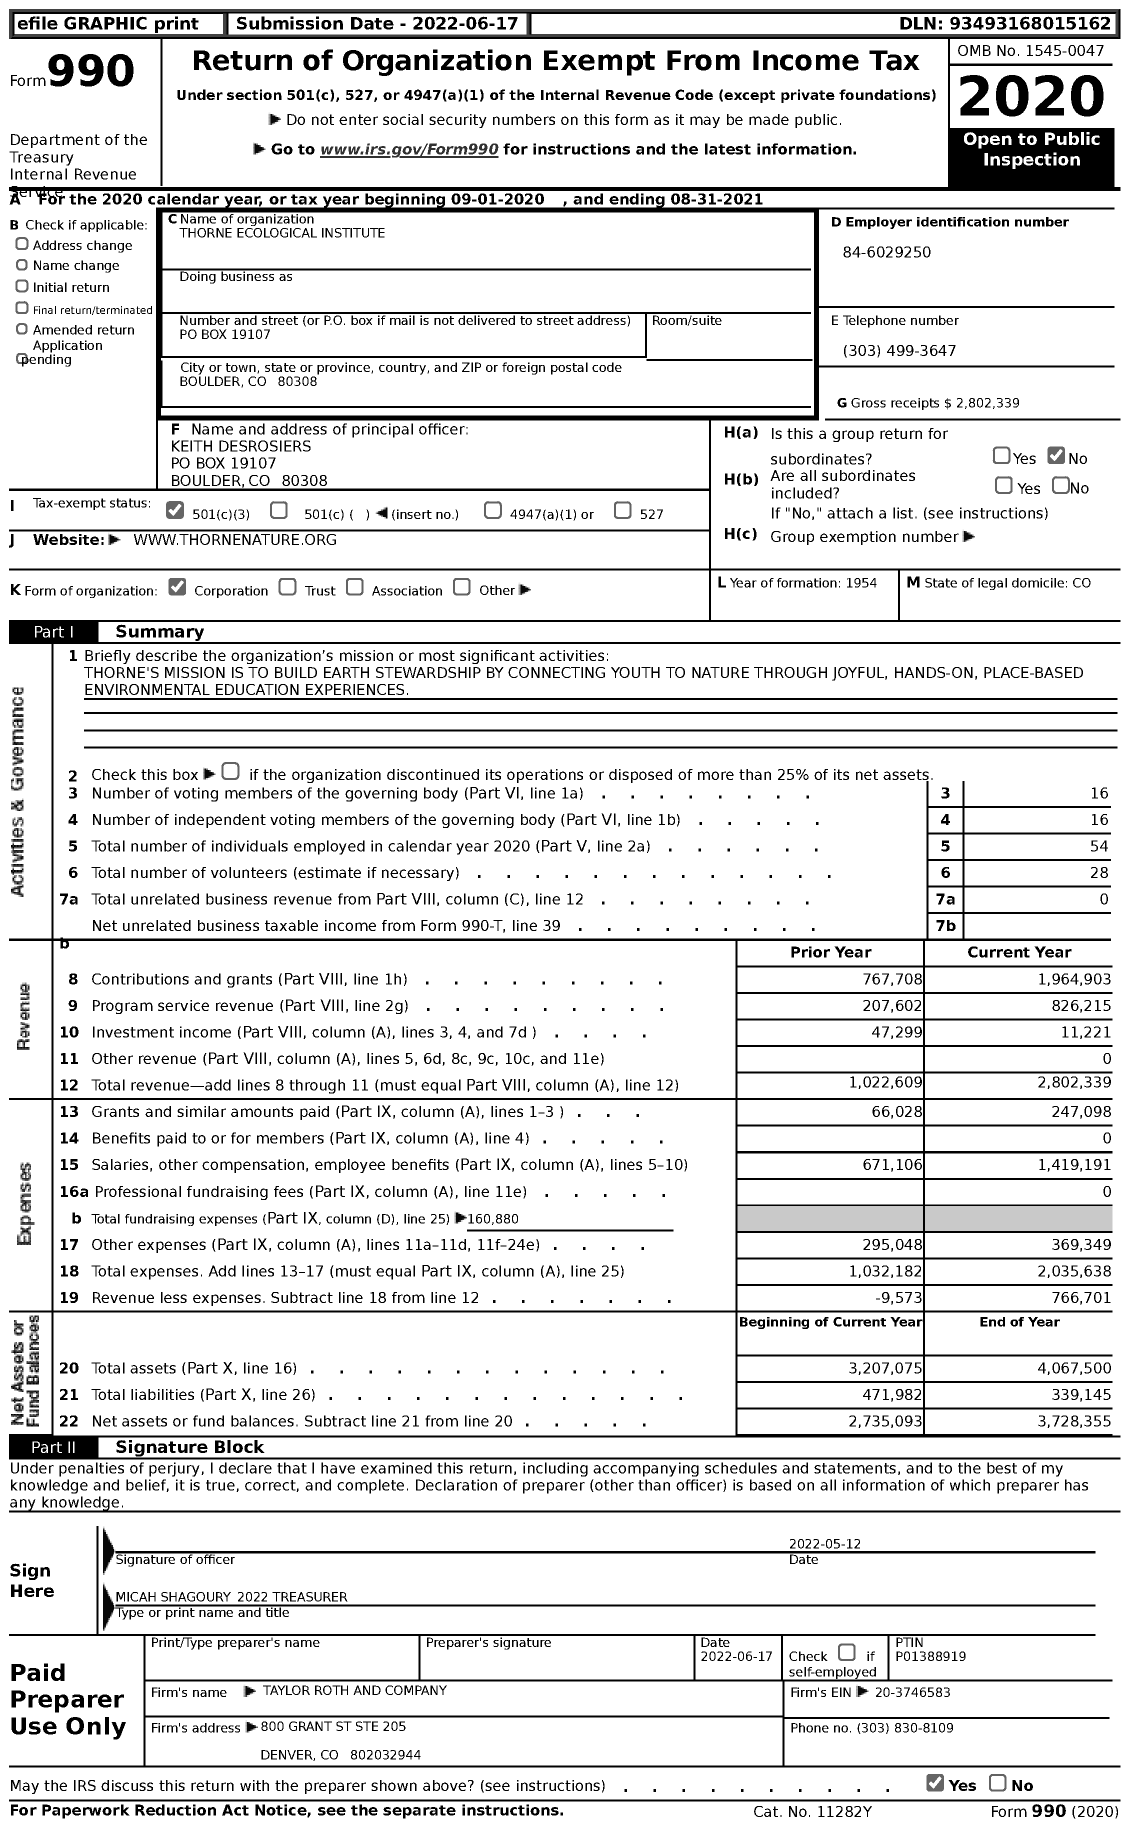 Image of first page of 2020 Form 990 for Thorne Ecological Institute